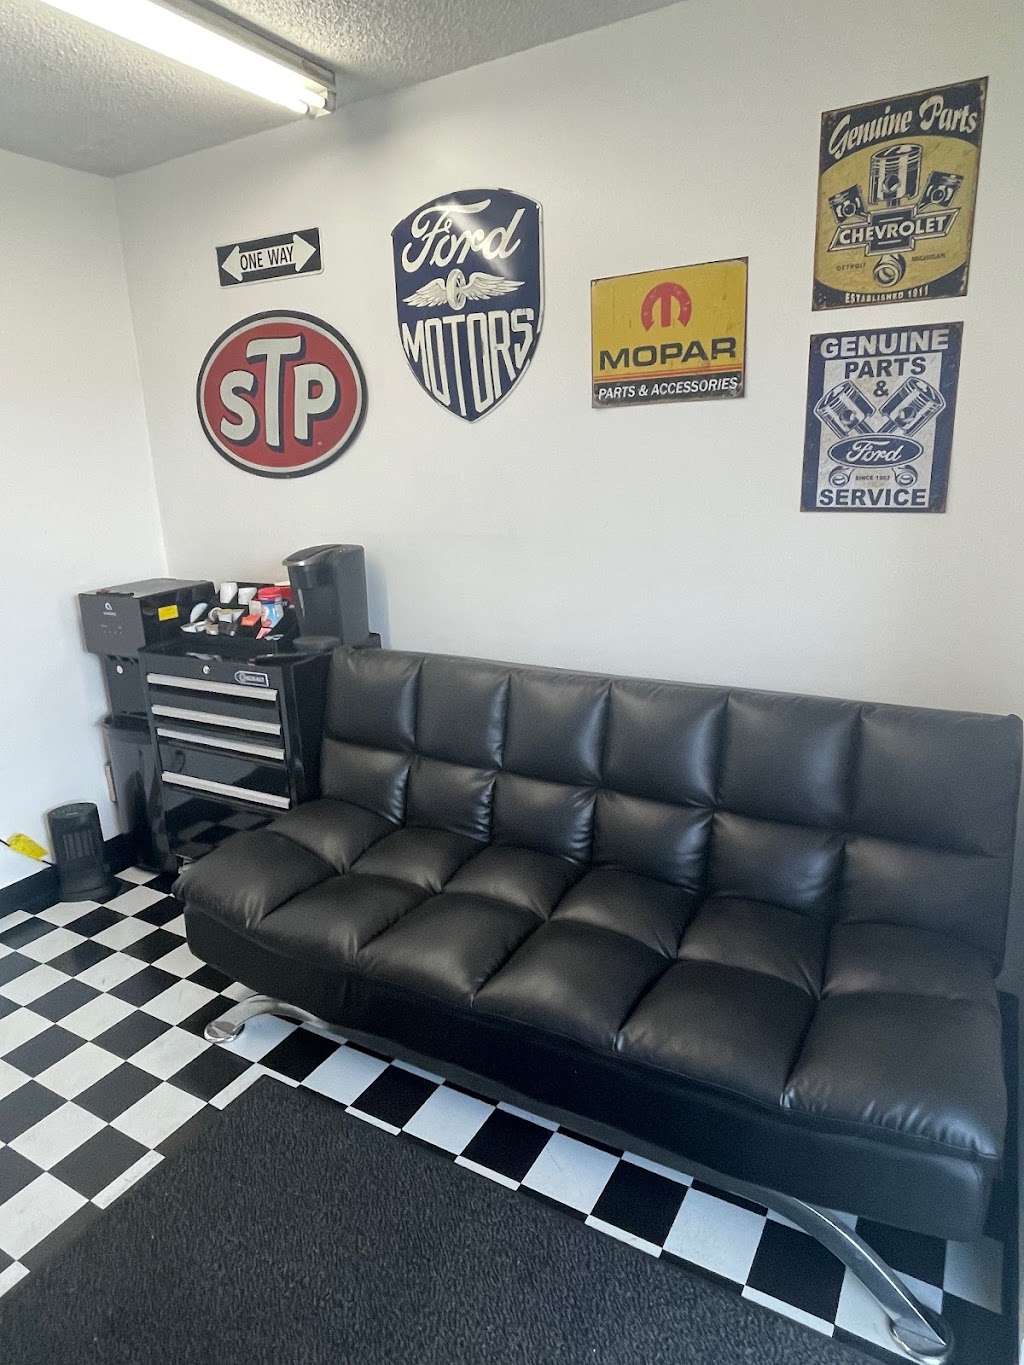 Jay’s Auto Repair | 13546 Central Ave ste d, Chino, CA 91710 | Phone: (909) 319-8606